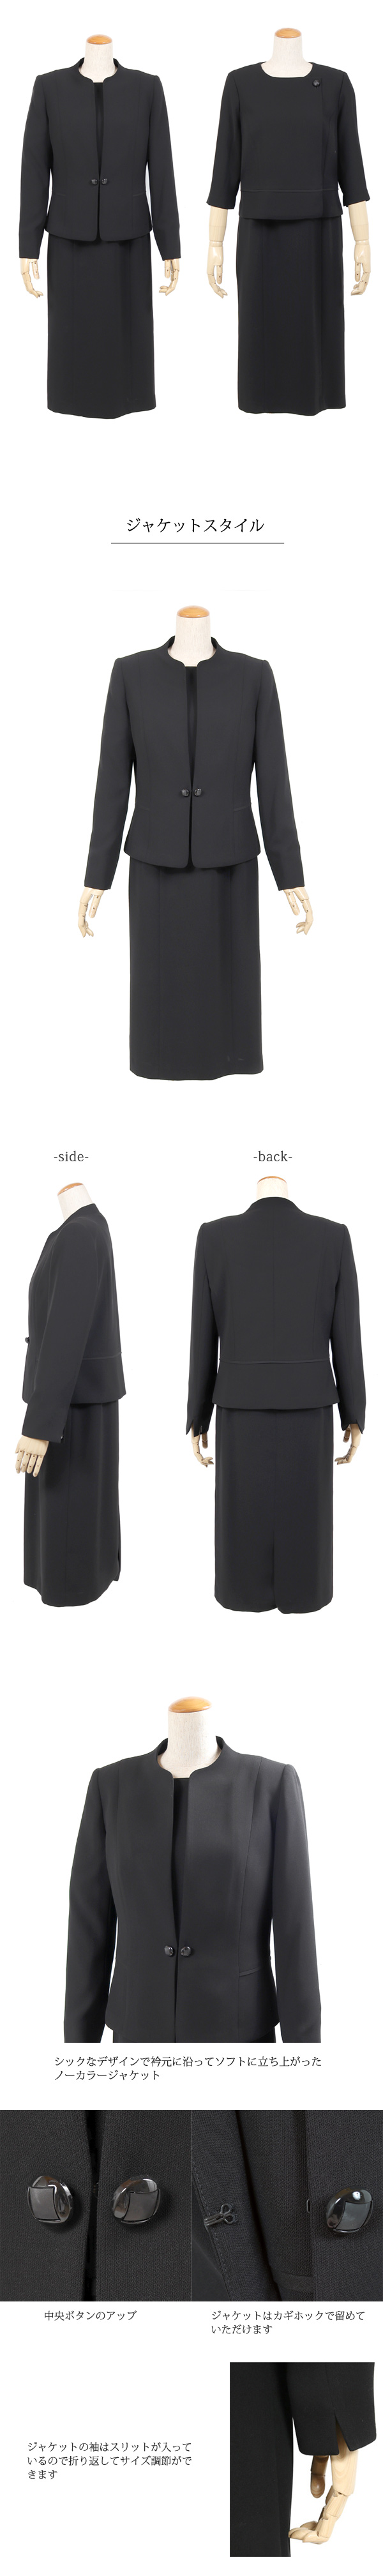  Kyoto style black formal ( mourning dress *. clothes ) ensemble formal suit front opening nursing 